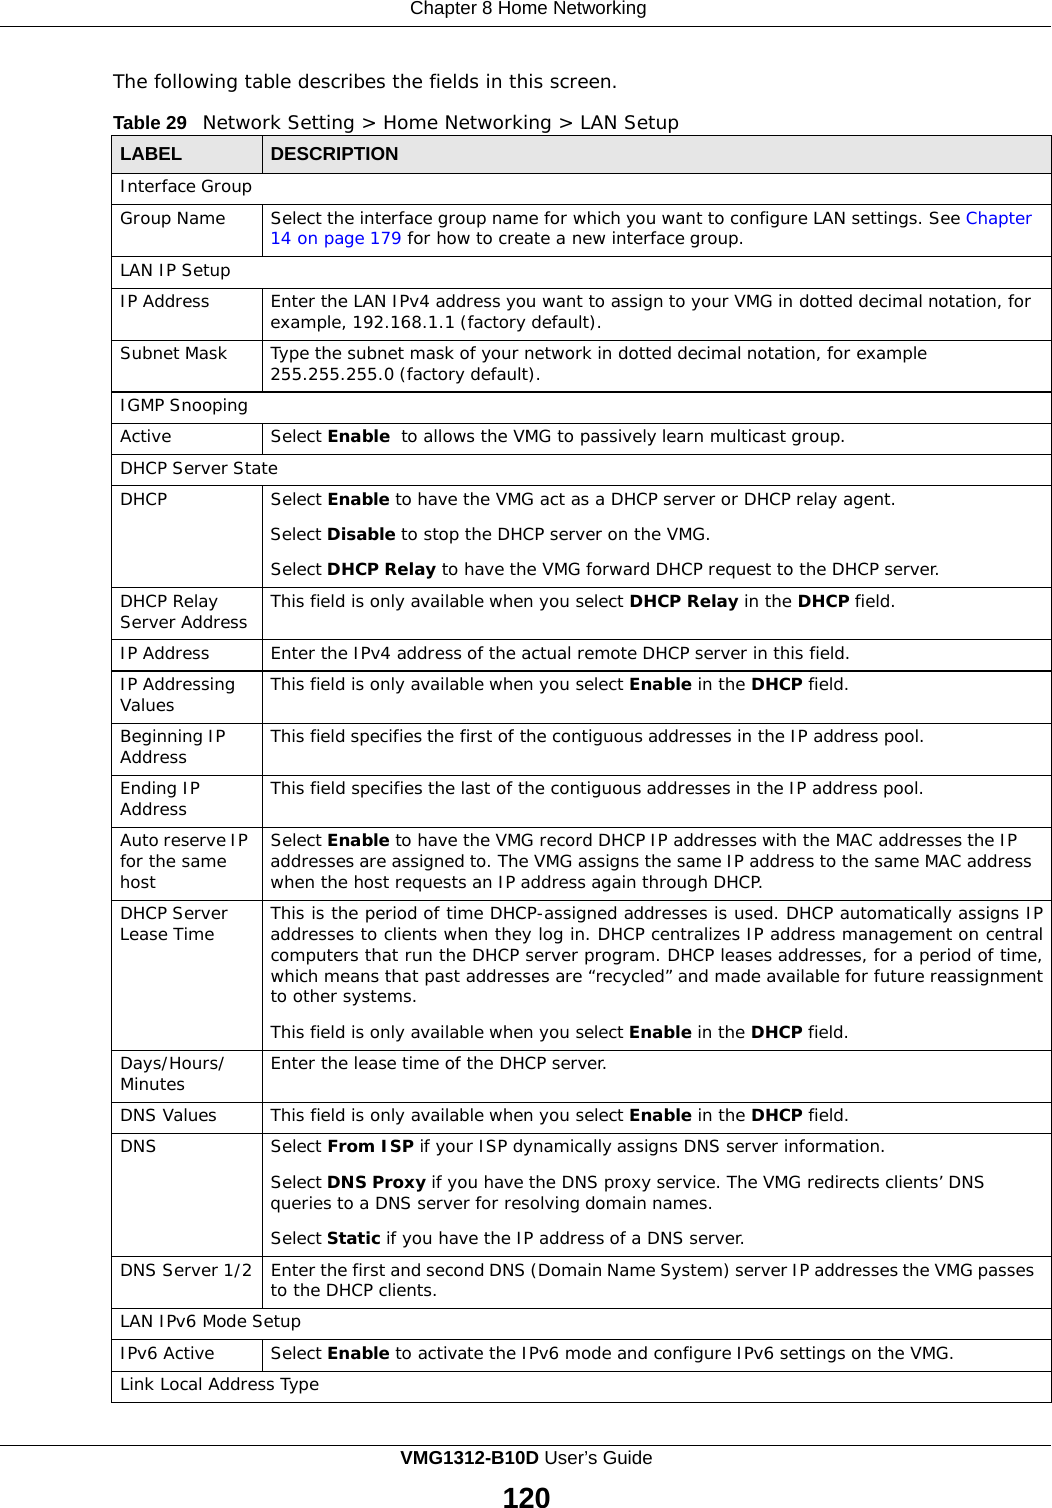 Chapter 8 Home Networking    The following table describes the fields in this screen.  Table 29   Network Setting &gt; Home Networking &gt; LAN Setup  LABEL DESCRIPTION Interface Group Group Name Select the interface group name for which you want to configure LAN settings. See Chapter 14 on page 179 for how to create a new interface group. LAN IP Setup IP Address Enter the LAN IPv4 address you want to assign to your VMG in dotted decimal notation, for example, 192.168.1.1 (factory default). Subnet Mask Type the subnet mask of your network in dotted decimal notation, for example 255.255.255.0 (factory default). IGMP Snooping Active Select Enable to allows the VMG to passively learn multicast group. DHCP Server State DHCP Select Enable to have the VMG act as a DHCP server or DHCP relay agent. Select Disable to stop the DHCP server on the VMG. Select DHCP Relay to have the VMG forward DHCP request to the DHCP server. DHCP Relay Server Address This field is only available when you select DHCP Relay in the DHCP field. IP Address Enter the IPv4 address of the actual remote DHCP server in this field. IP Addressing Values This field is only available when you select Enable in the DHCP field. Beginning IP Address This field specifies the first of the contiguous addresses in the IP address pool. Ending IP Address This field specifies the last of the contiguous addresses in the IP address pool. Auto reserve IP for the same host Select Enable to have the VMG record DHCP IP addresses with the MAC addresses the IP addresses are assigned to. The VMG assigns the same IP address to the same MAC address when the host requests an IP address again through DHCP. DHCP Server Lease Time This is the period of time DHCP-assigned addresses is used. DHCP automatically assigns IP addresses to clients when they log in. DHCP centralizes IP address management on central computers that run the DHCP server program. DHCP leases addresses, for a period of time, which means that past addresses are “recycled” and made available for future reassignment to other systems.  This field is only available when you select Enable in the DHCP field. Days/Hours/ Minutes Enter the lease time of the DHCP server. DNS Values This field is only available when you select Enable in the DHCP field. DNS Select From ISP if your ISP dynamically assigns DNS server information.  Select DNS Proxy if you have the DNS proxy service. The VMG redirects clients’ DNS queries to a DNS server for resolving domain names.  Select Static if you have the IP address of a DNS server. DNS Server 1/2 Enter the first and second DNS (Domain Name System) server IP addresses the VMG passes to the DHCP clients. LAN IPv6 Mode Setup IPv6 Active Select Enable to activate the IPv6 mode and configure IPv6 settings on the VMG. Link Local Address Type VMG1312-B10D User’s Guide  120  